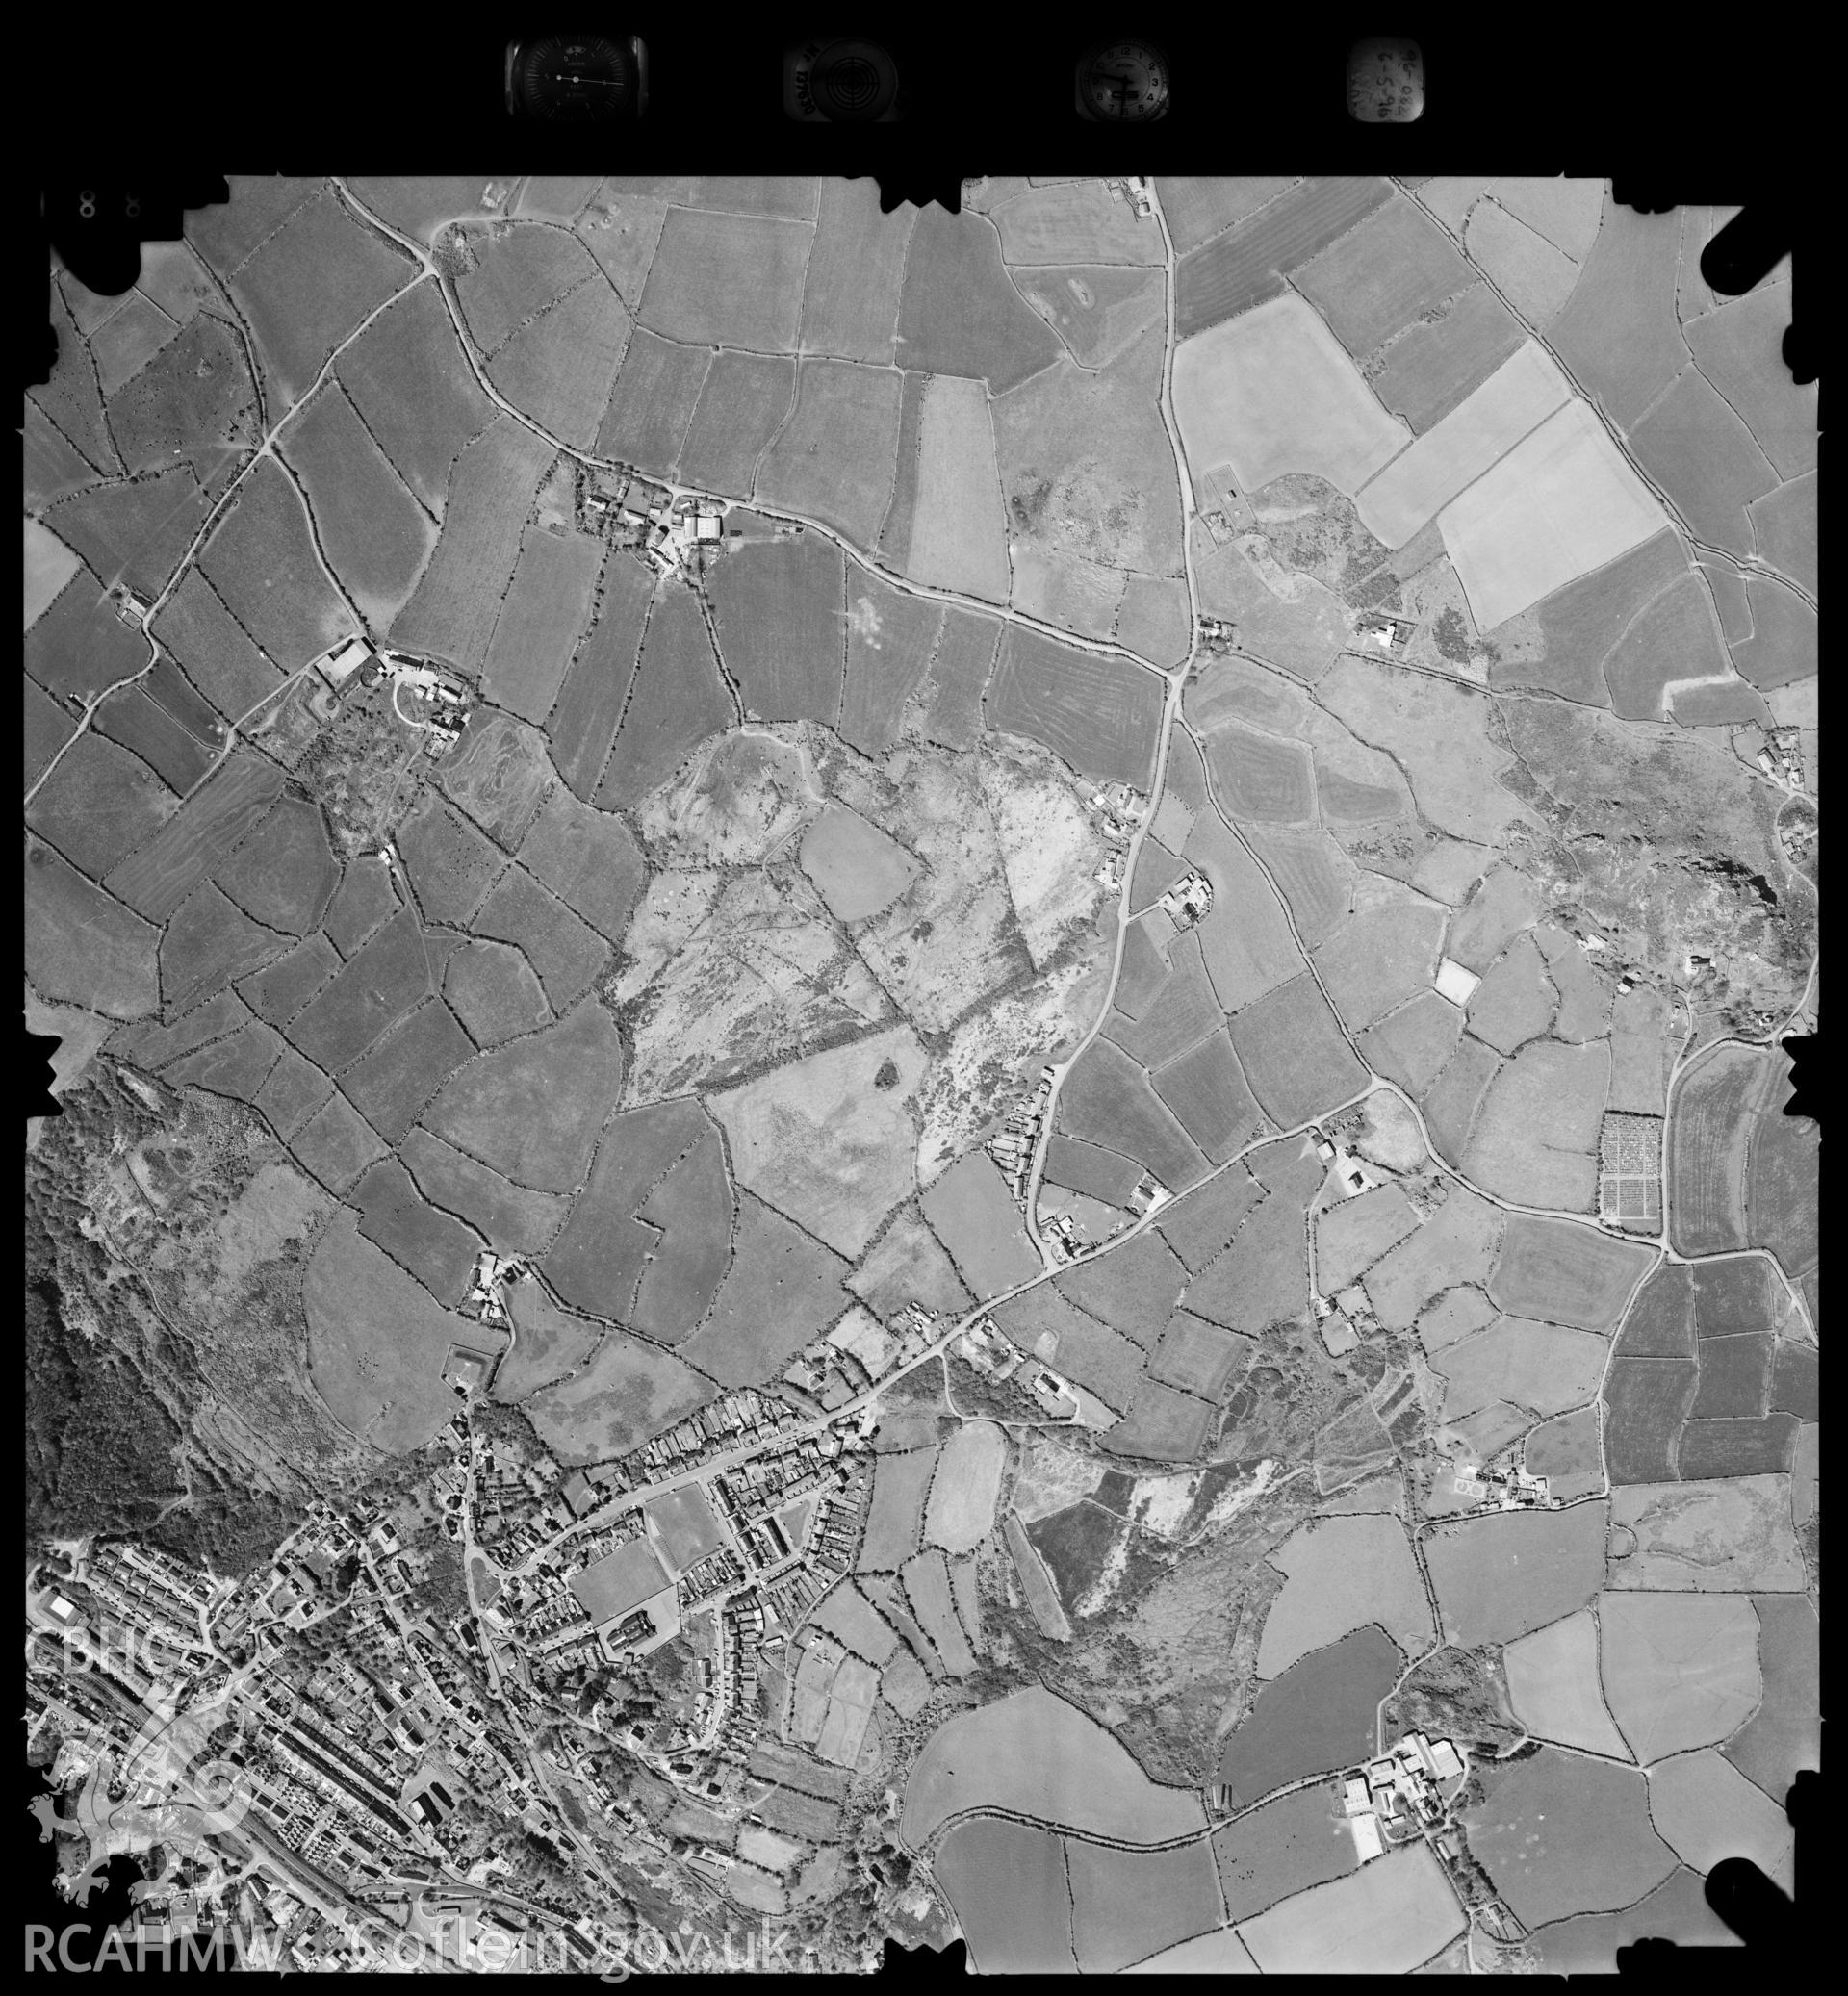 Digitized copy of an aerial photograph showing the Fishguard area,  taken by Ordnance Survey, 1996